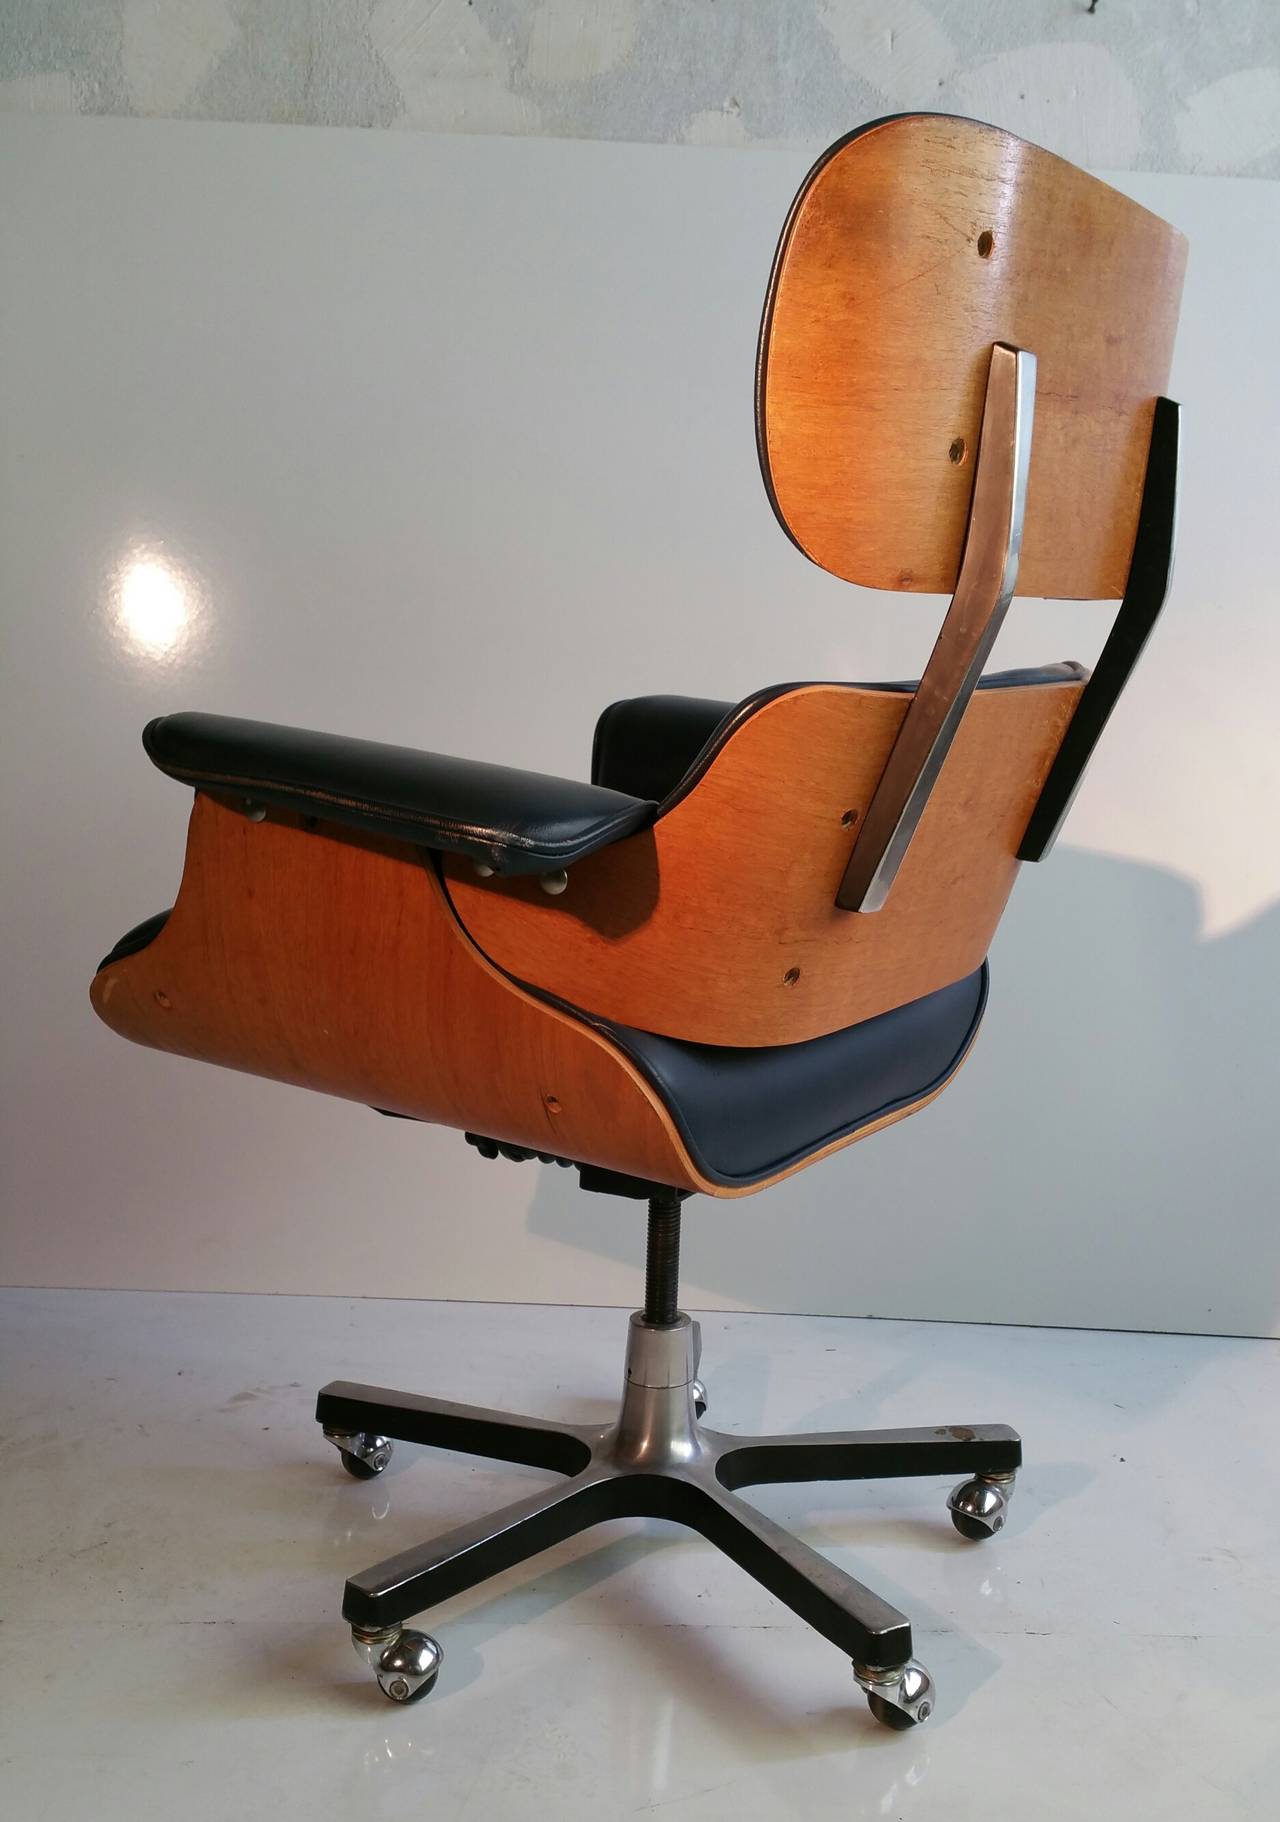 Modernist Eames Style Leather Desk Chair at 1stdibs